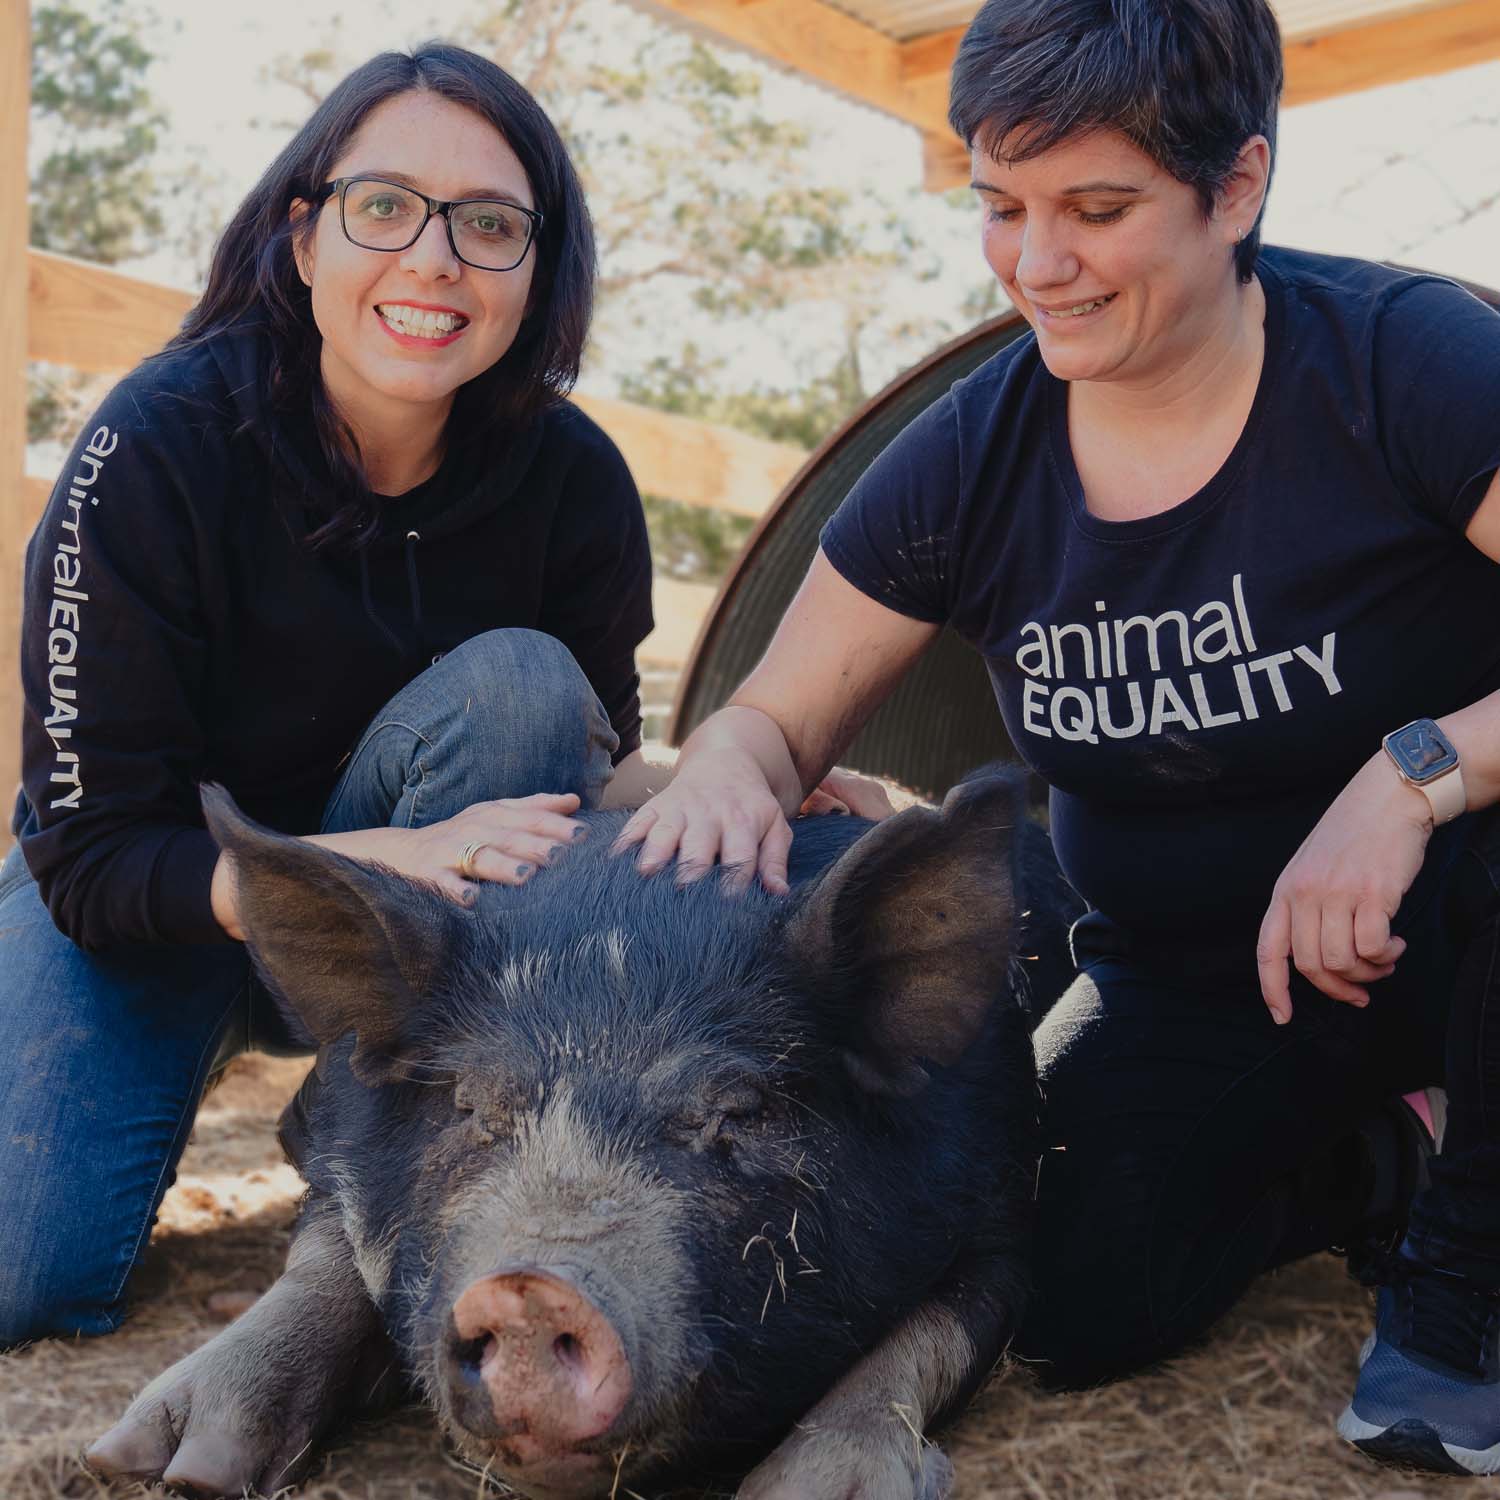 2023 womens day dulce sharon pig farm leadership 1500x1500 1 Meet the Women Leaders Behind Animal Equality’s Mission